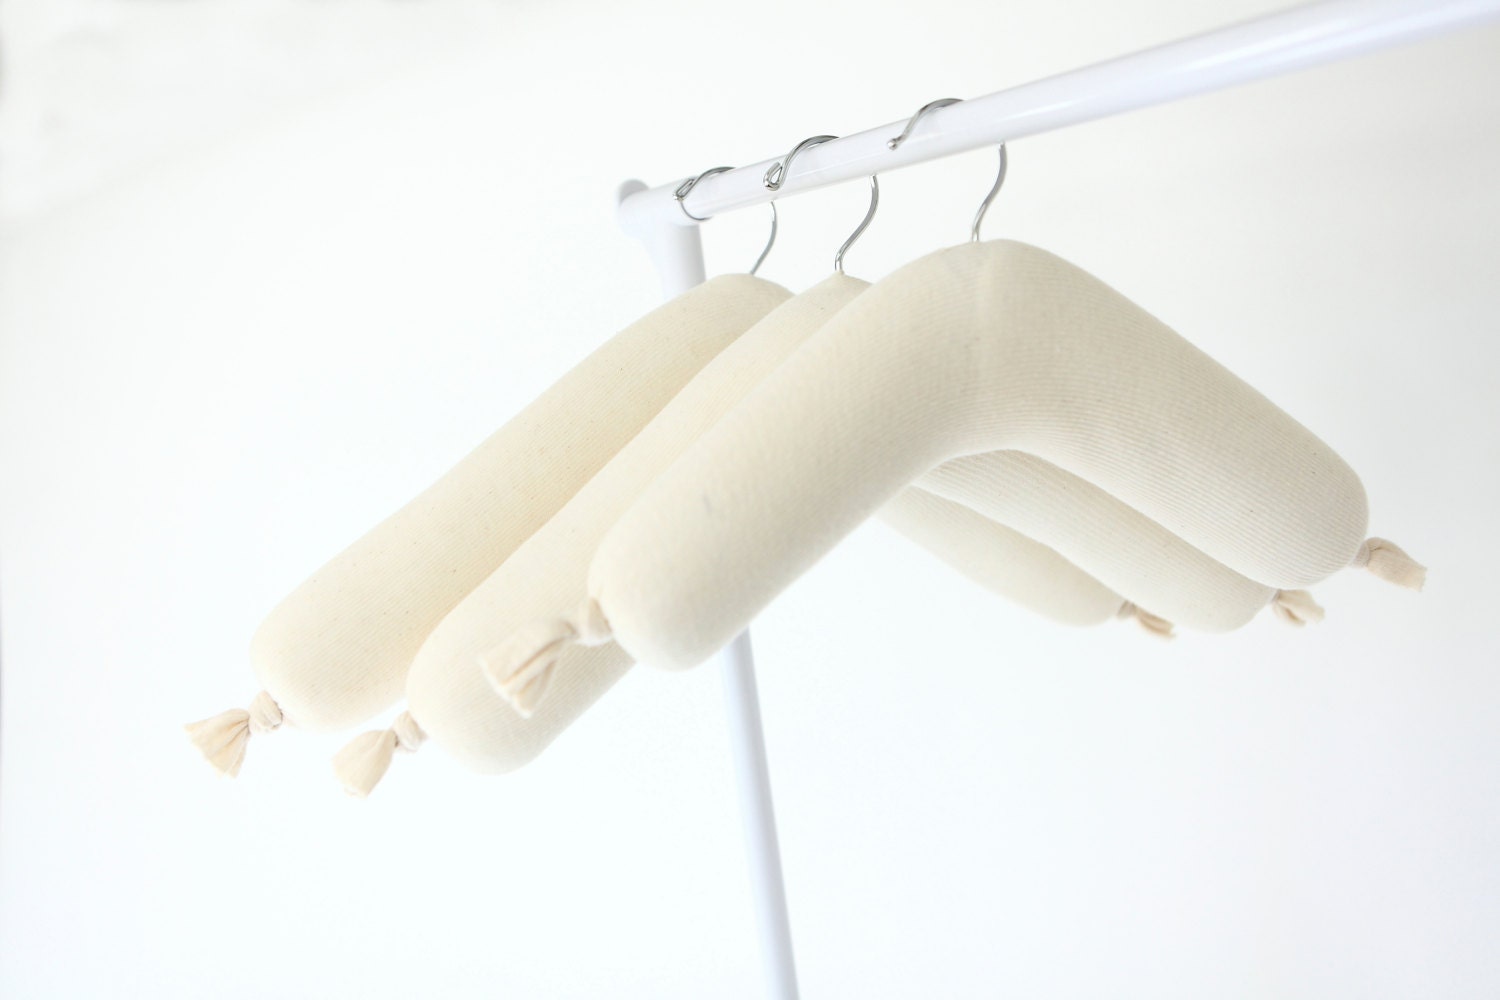 Padded Hangers for Closets Museums Historical Societies Vintage Collections Heirlooms Antiques Knitwear Sweaters Formalwear Wedding Dress Prom Dress Suit Jackets Blazers Closet Organization Preservation and Museum Quality Handmade to Save your Clothes